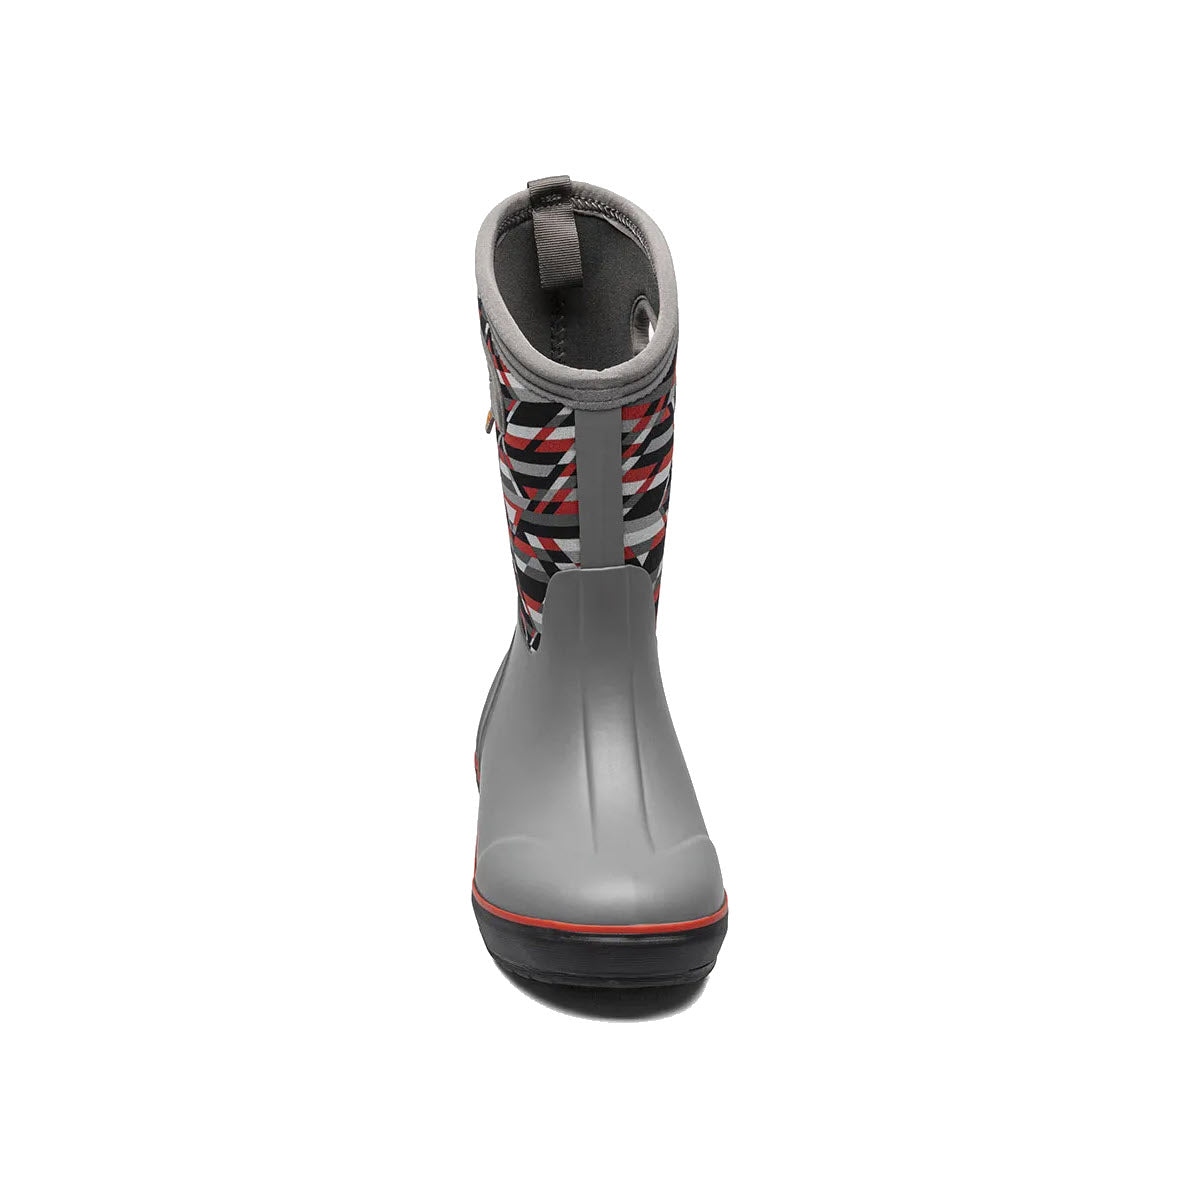 A single Bogs Classic II Mountain Geo Gray Multi boot with a red and black striped waterproof insulation side panel on a white background.